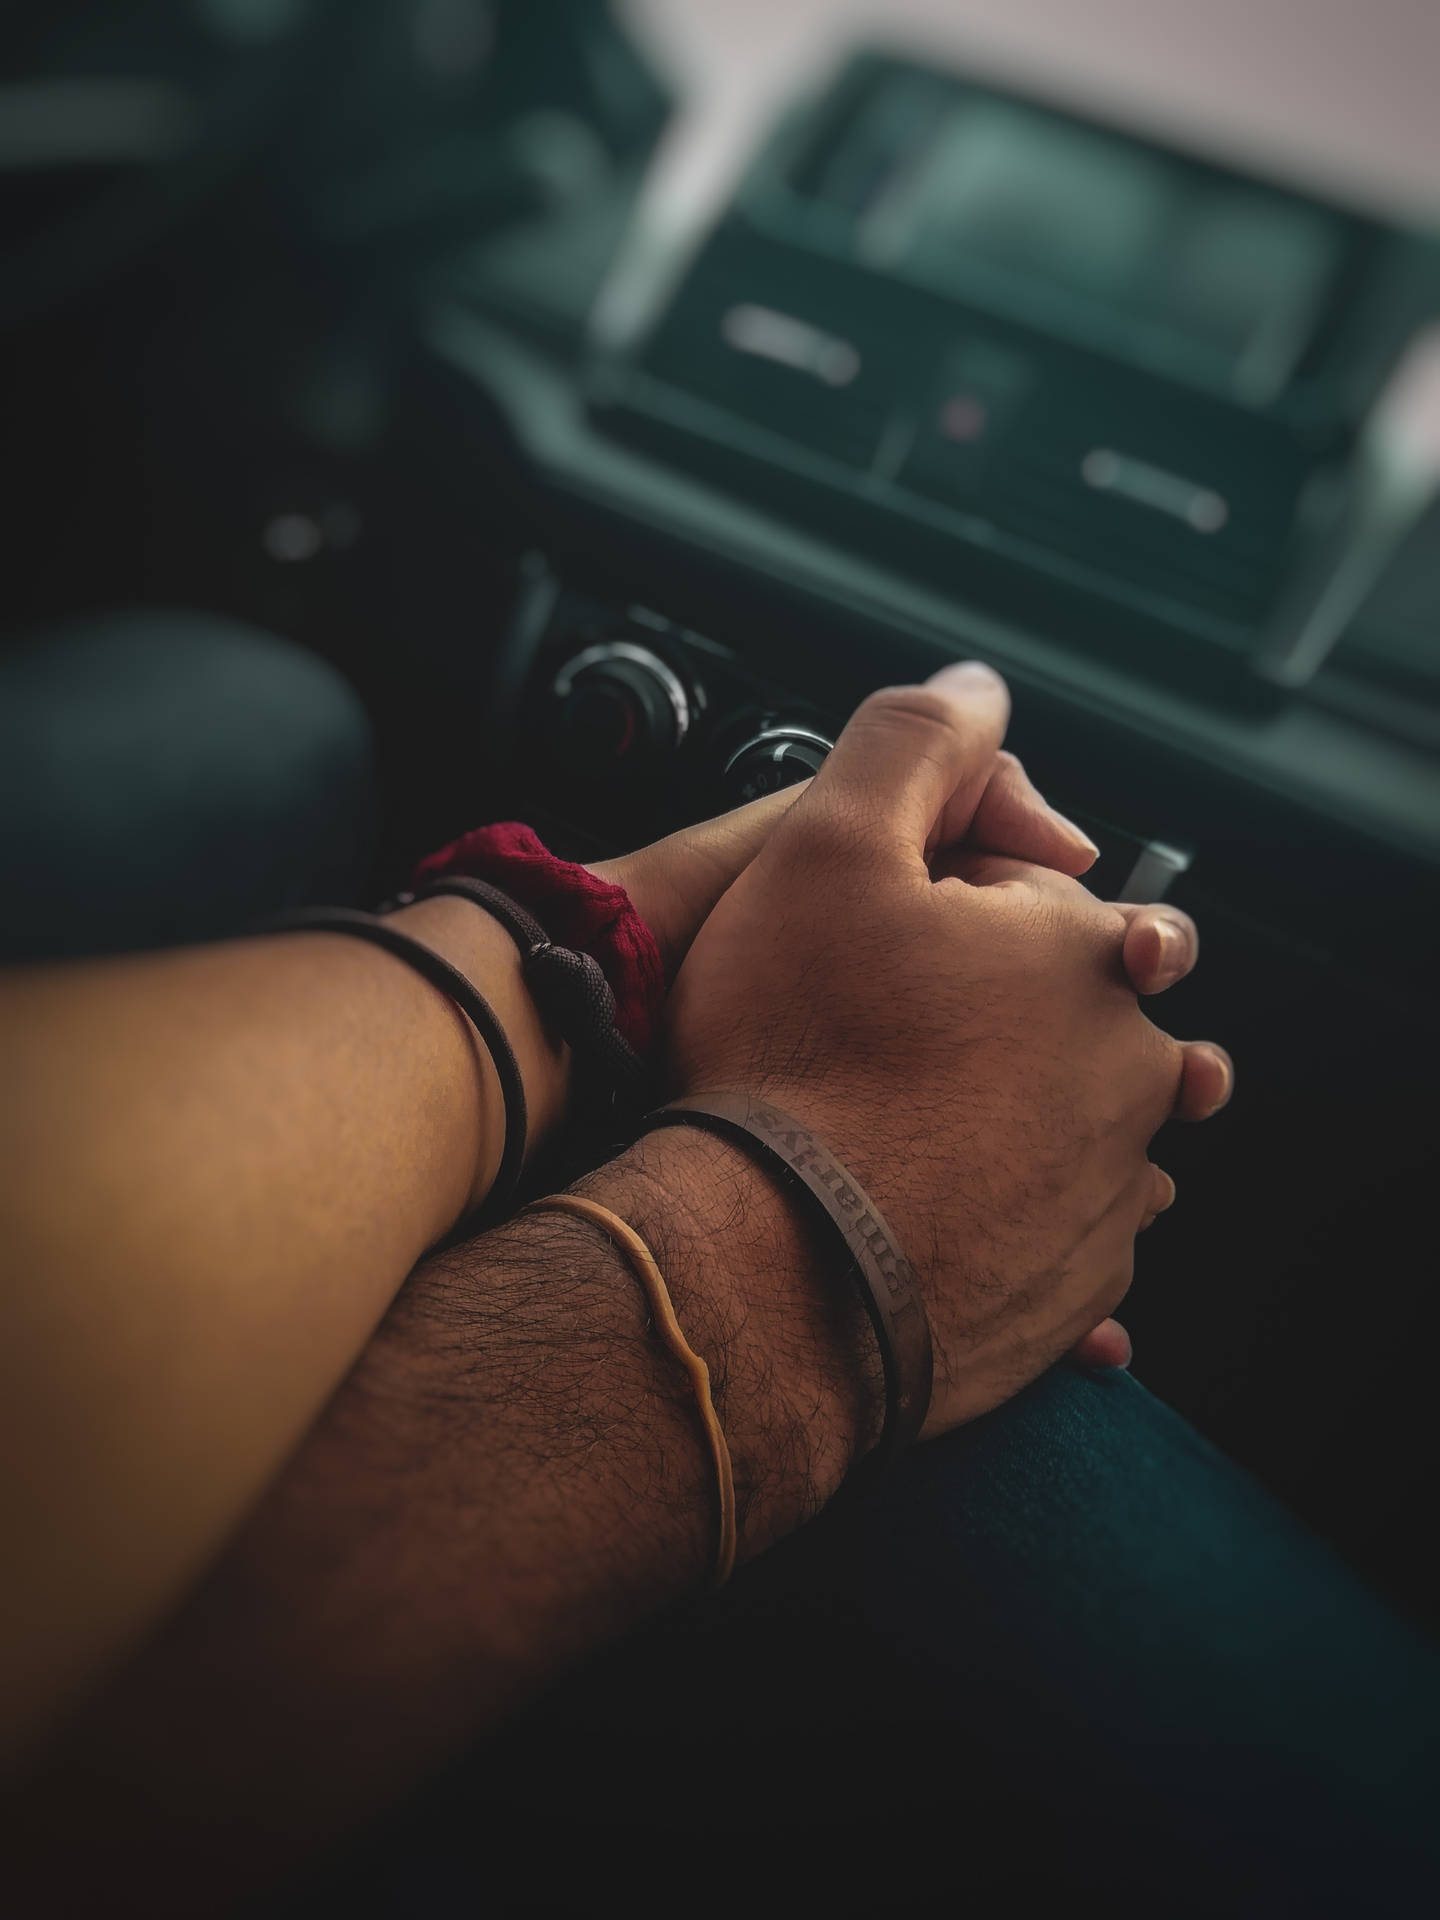 Holding Hands In The Car Wallpaper